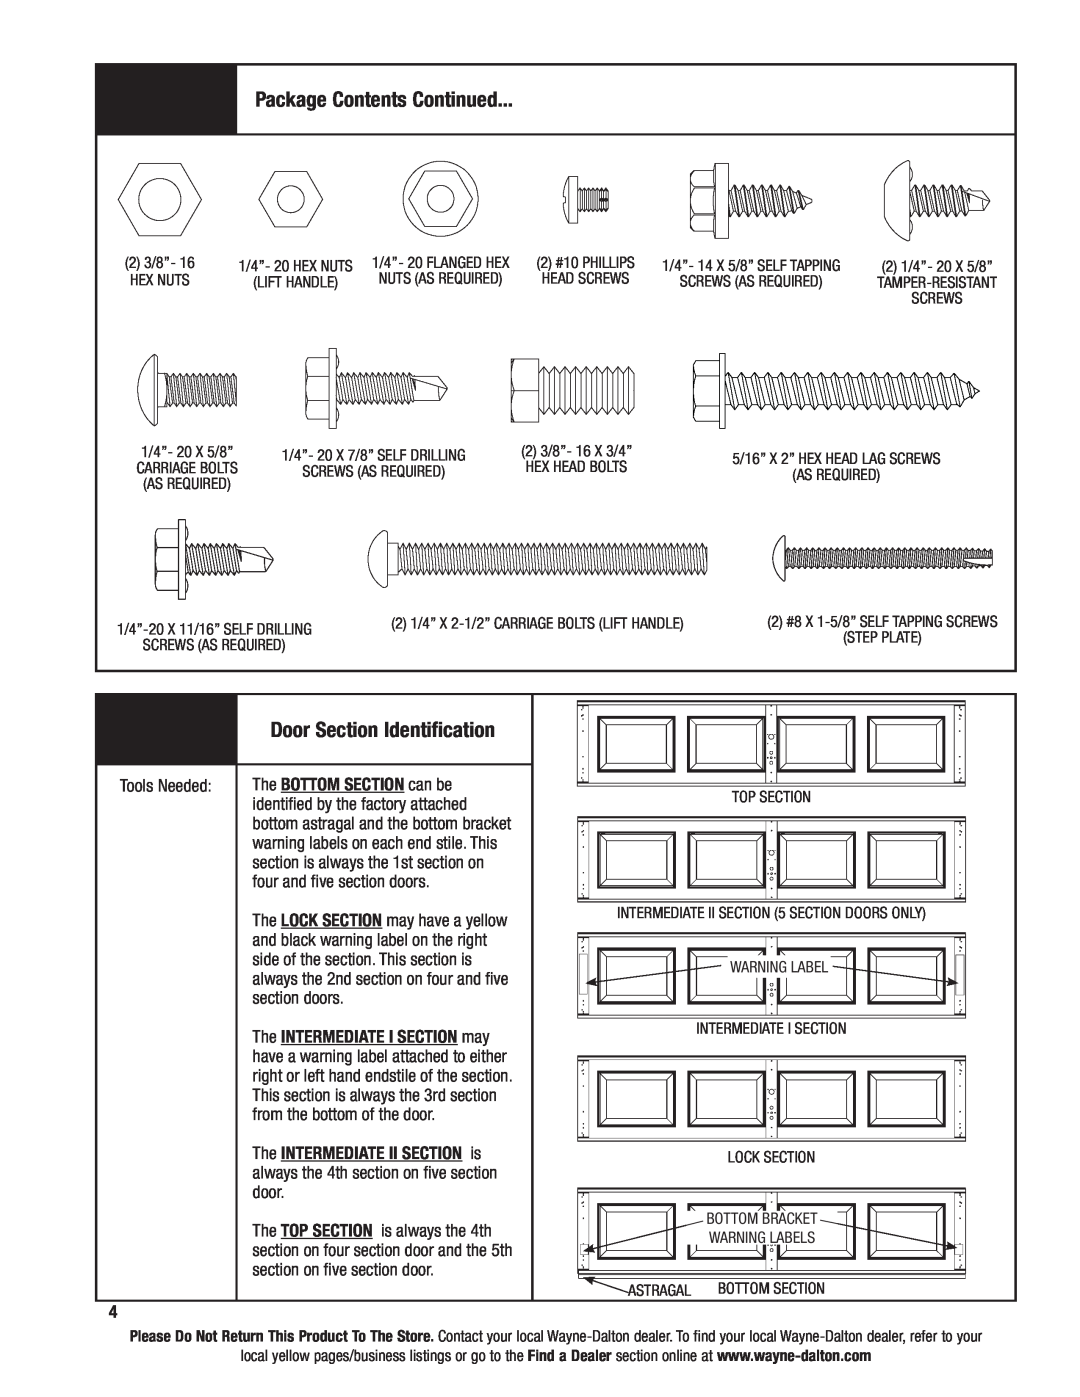 Wayne-Dalton 46 installation instructions Door Section Identification, Package Contents Continued 